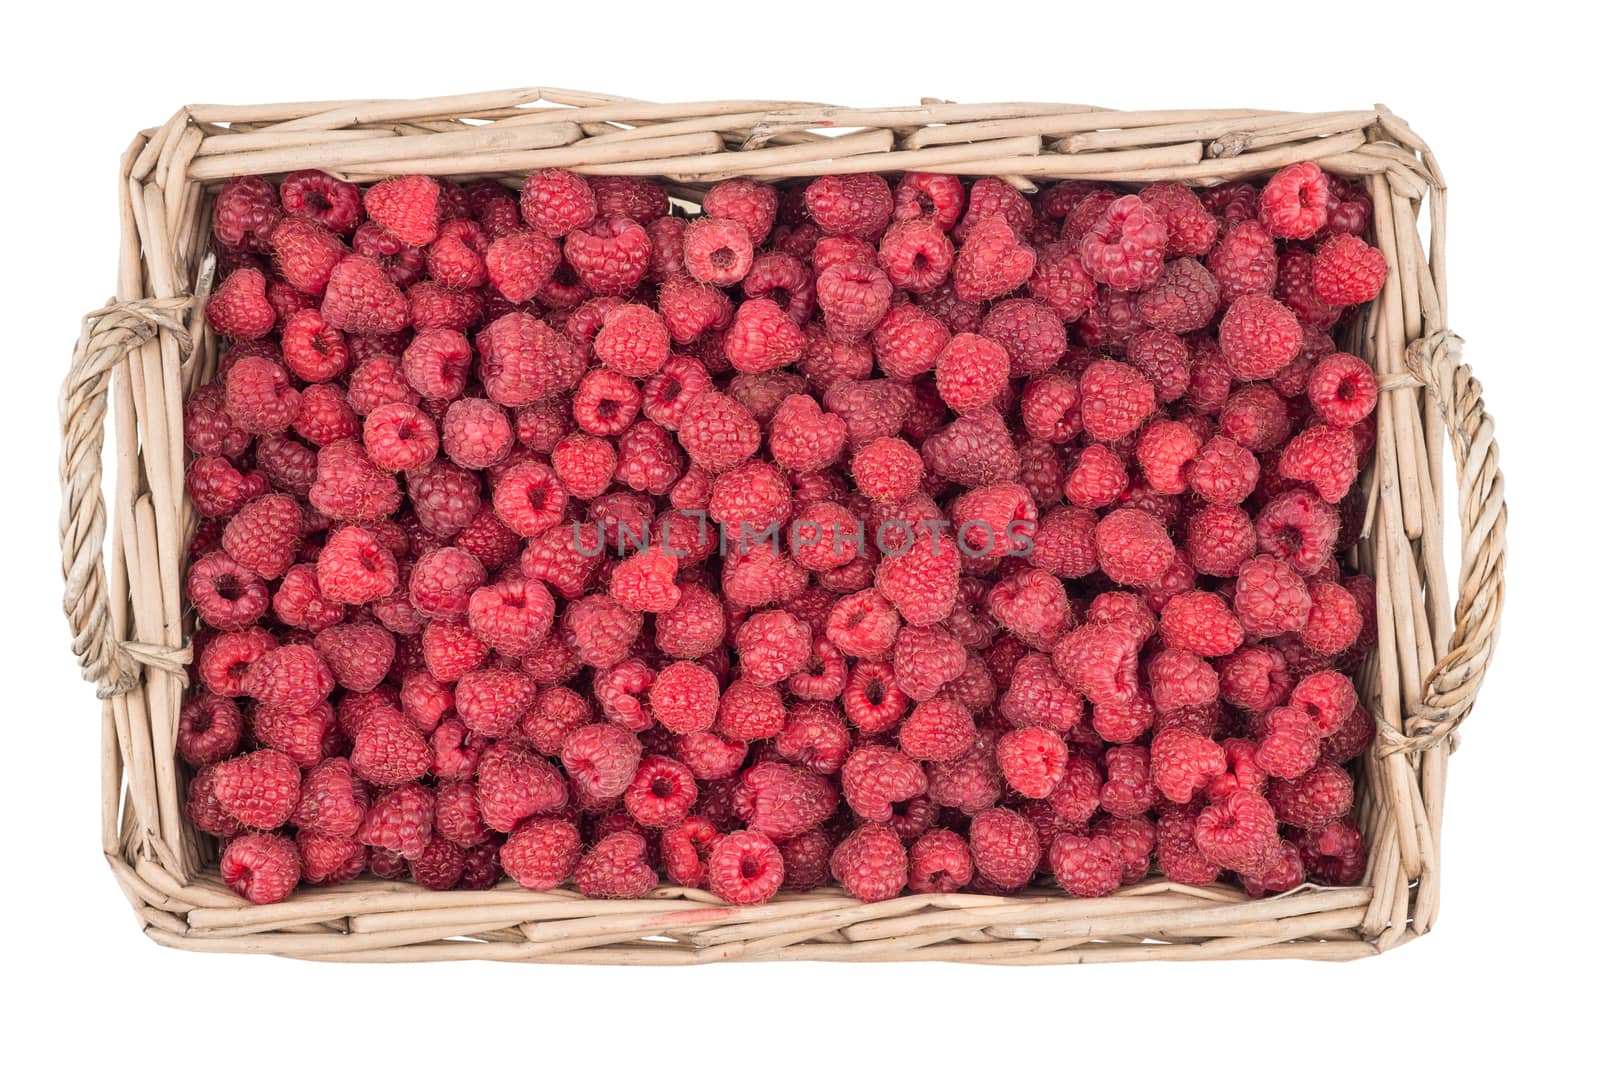 Raspberries in the basket isolated on white background. Top view.